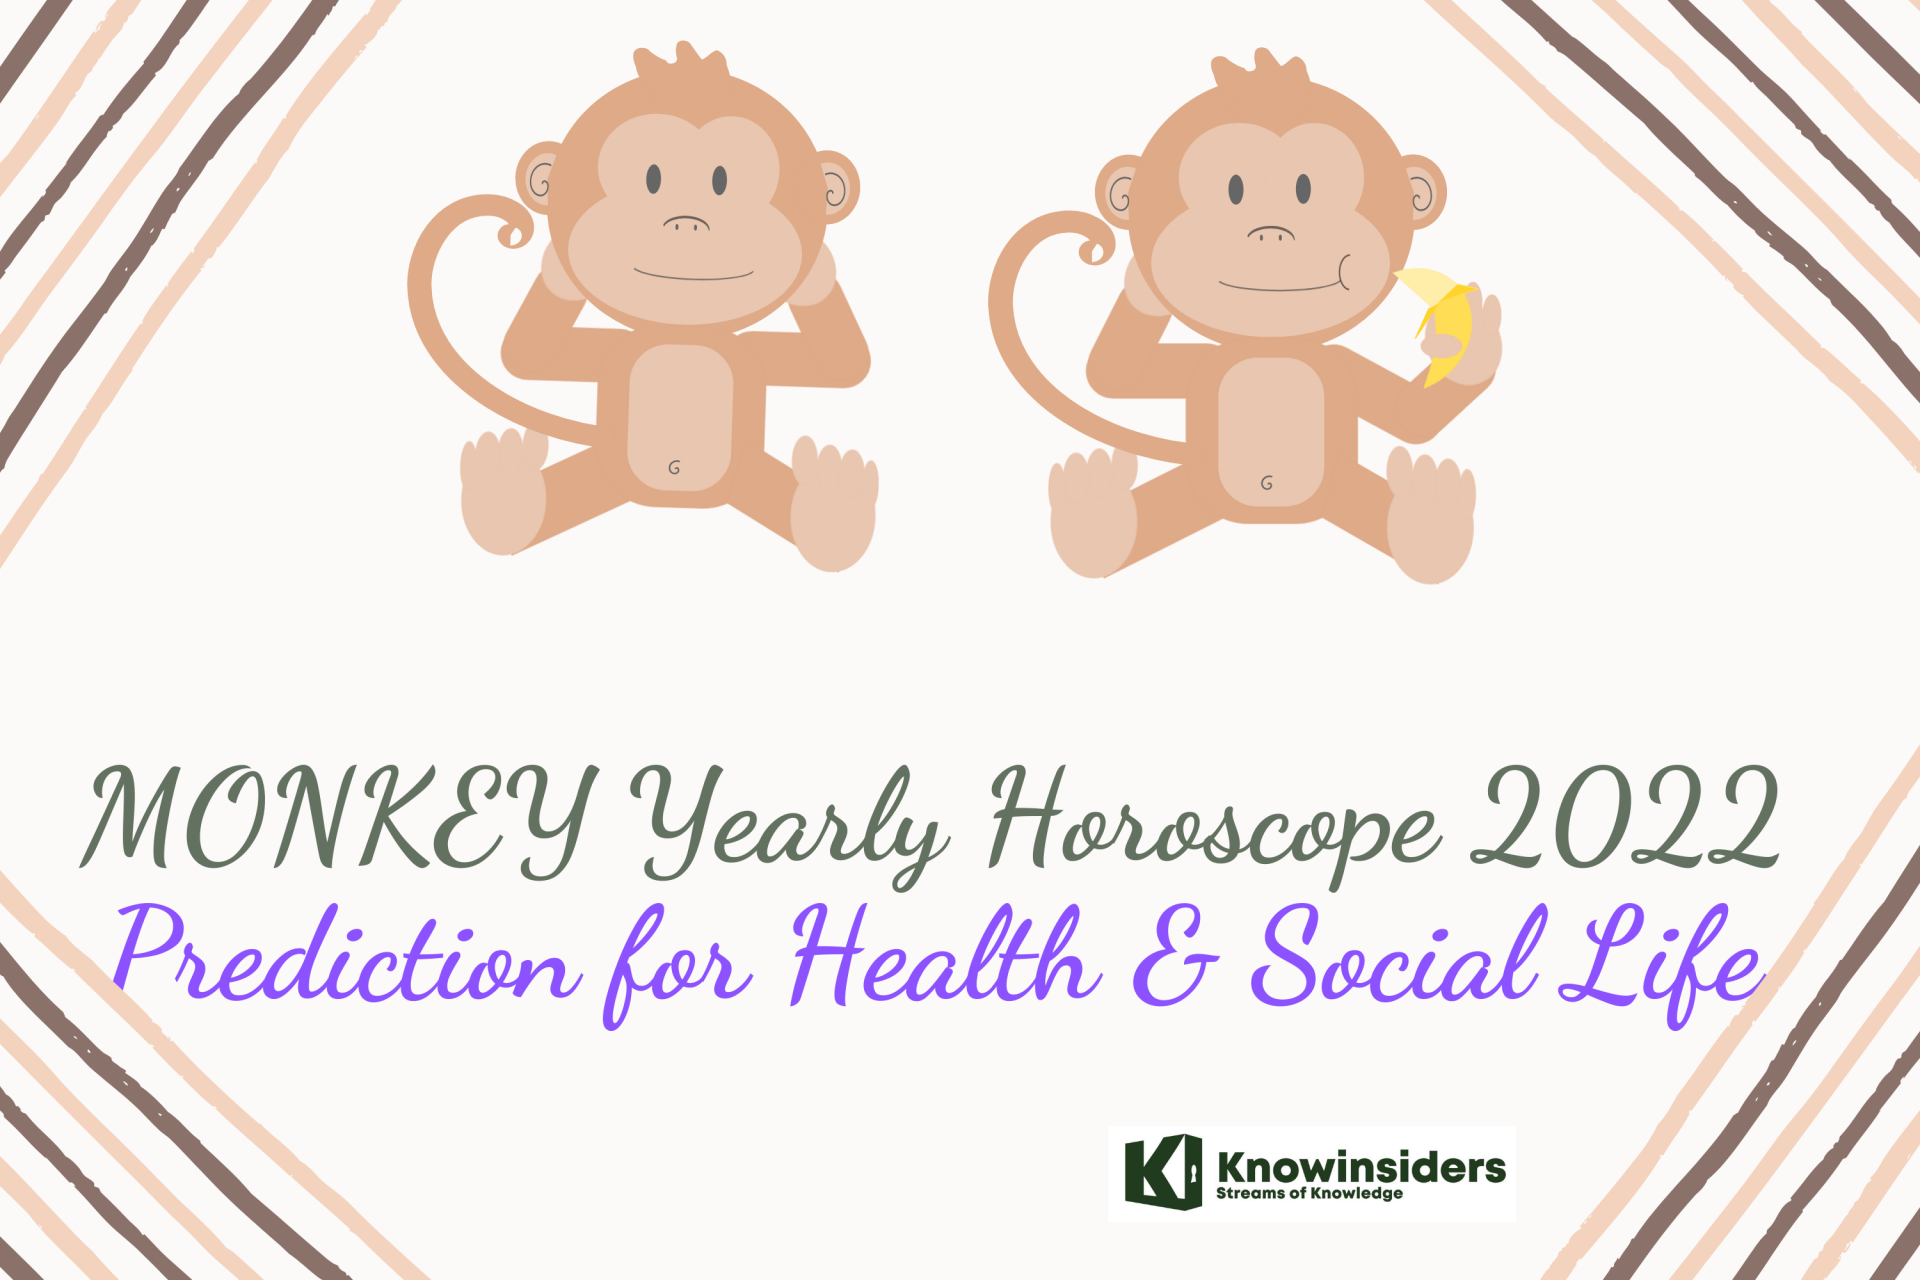 MONKEY Yearly Horoscope 2022 – Feng Shui Prediction for Health, Social Life